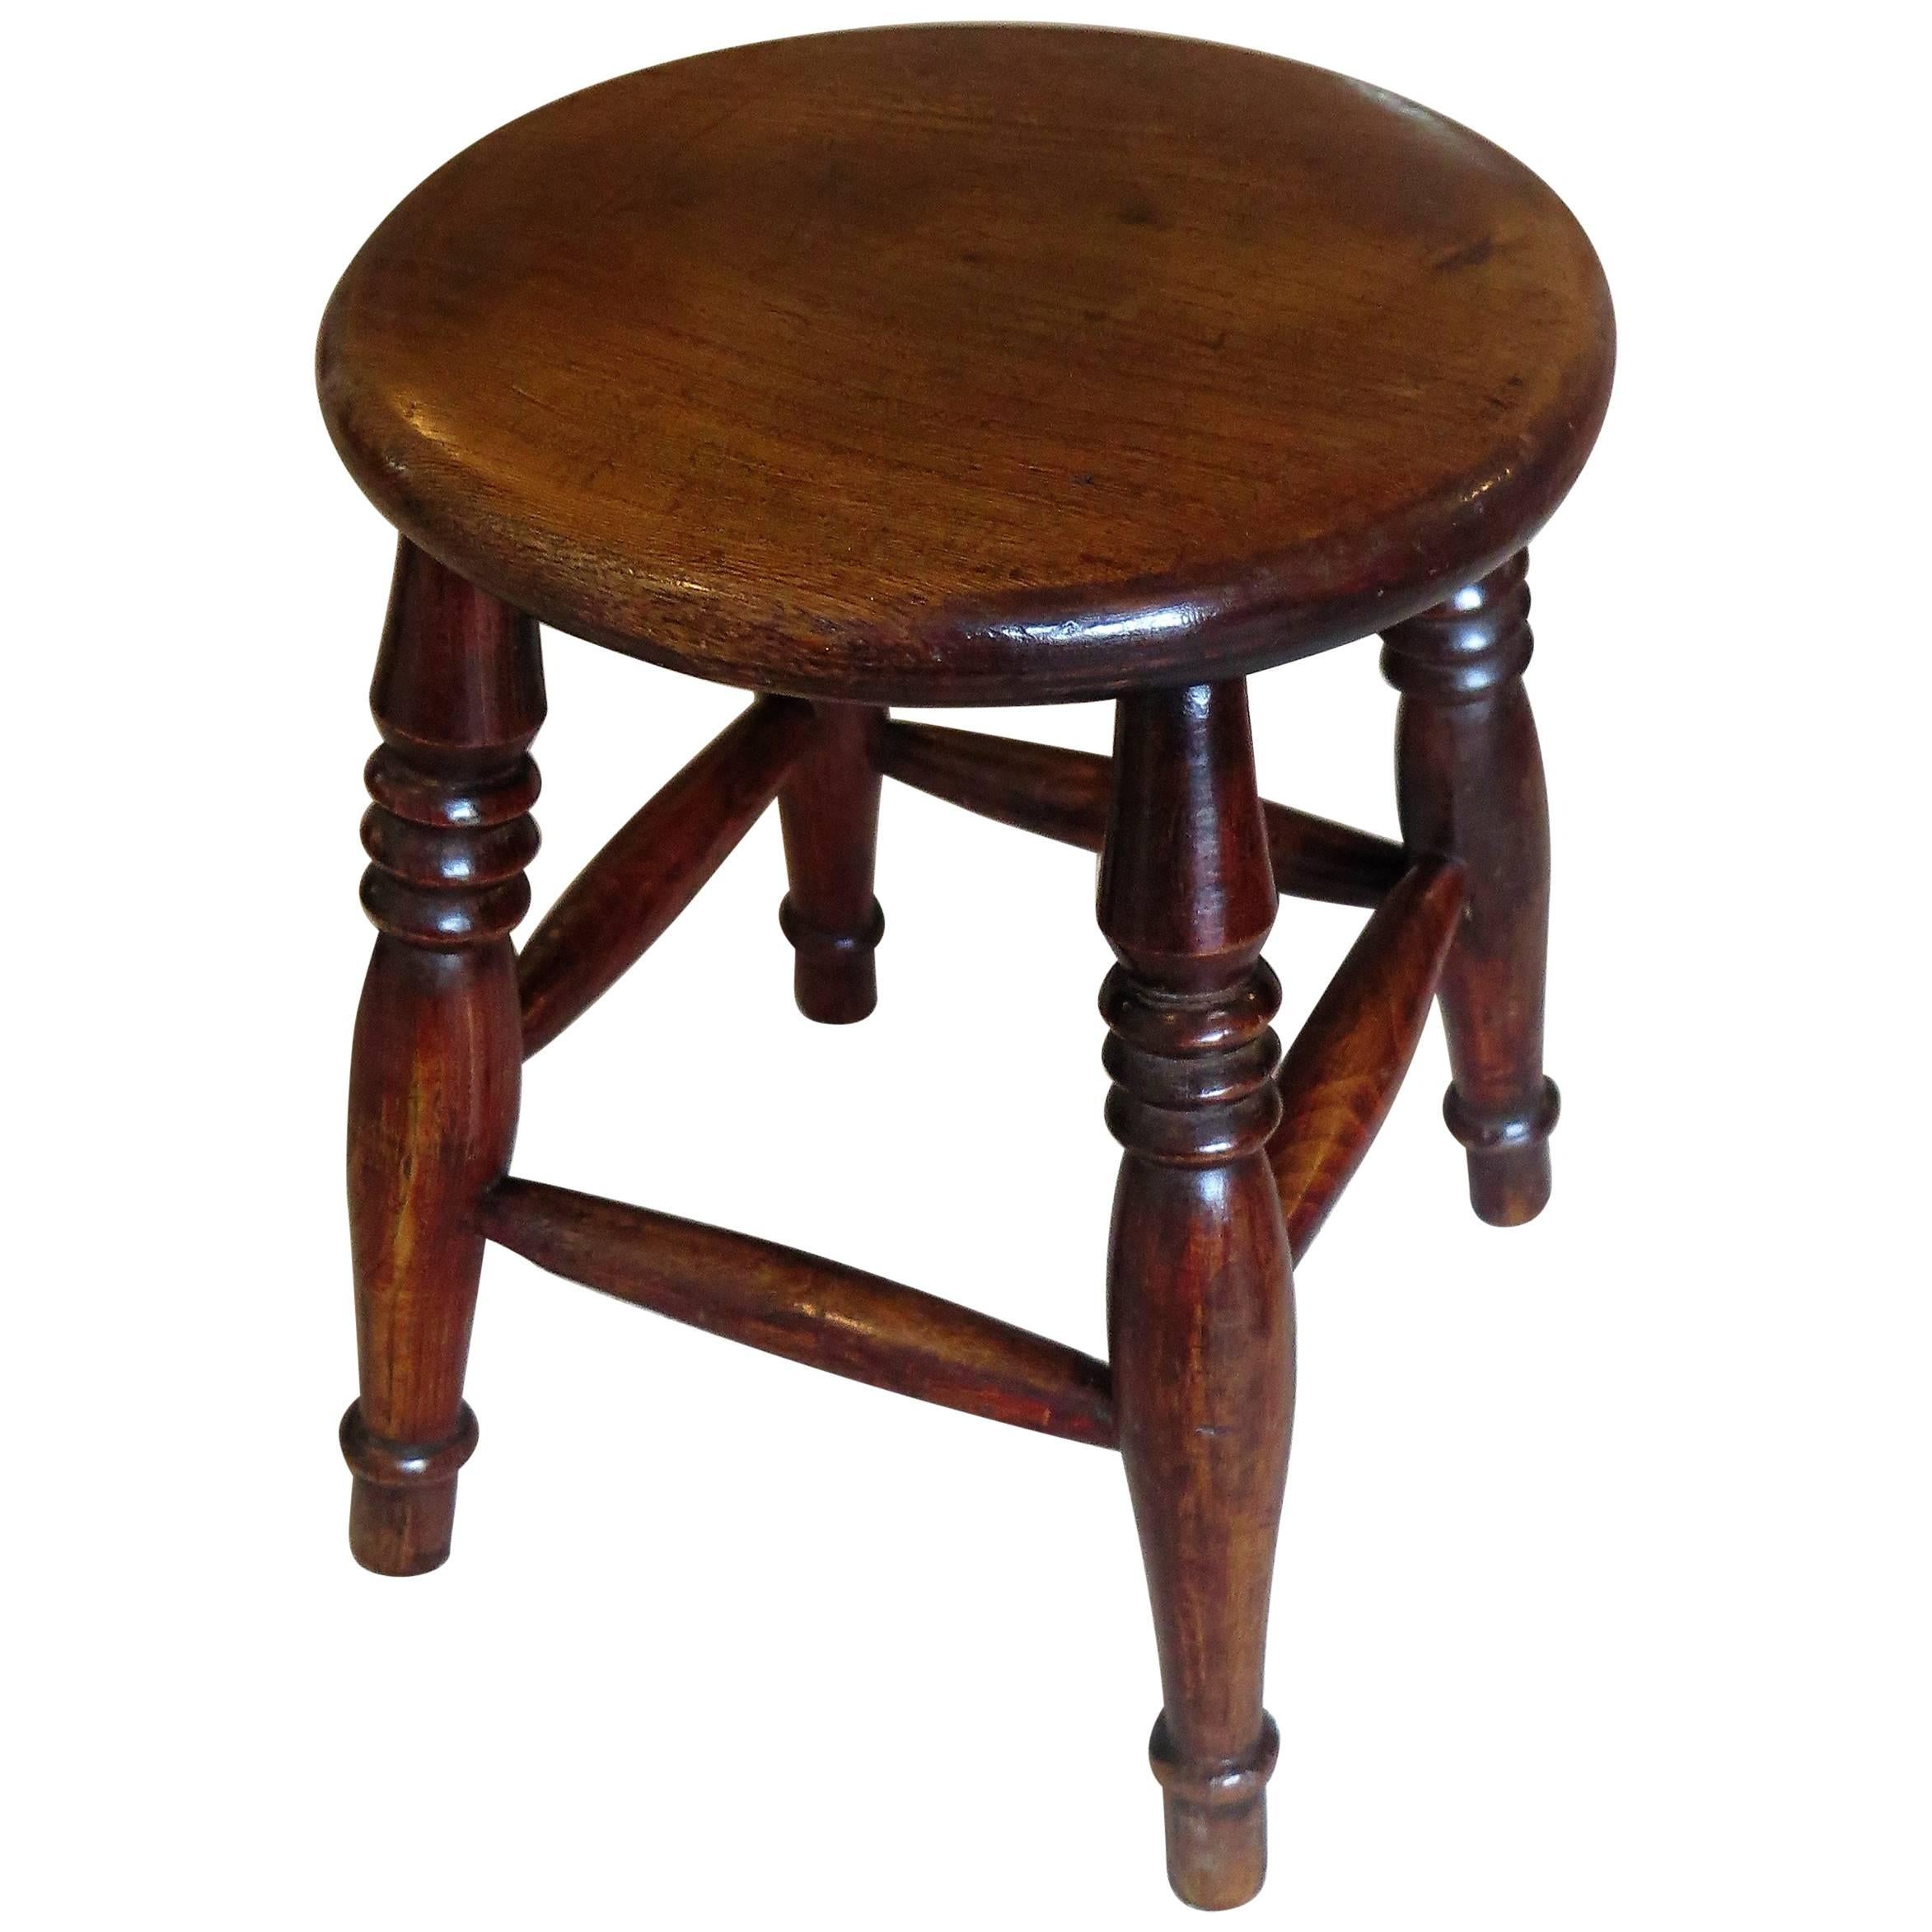 Elm Stool or Stand North East Yorkshire English Maker, Circa 1850